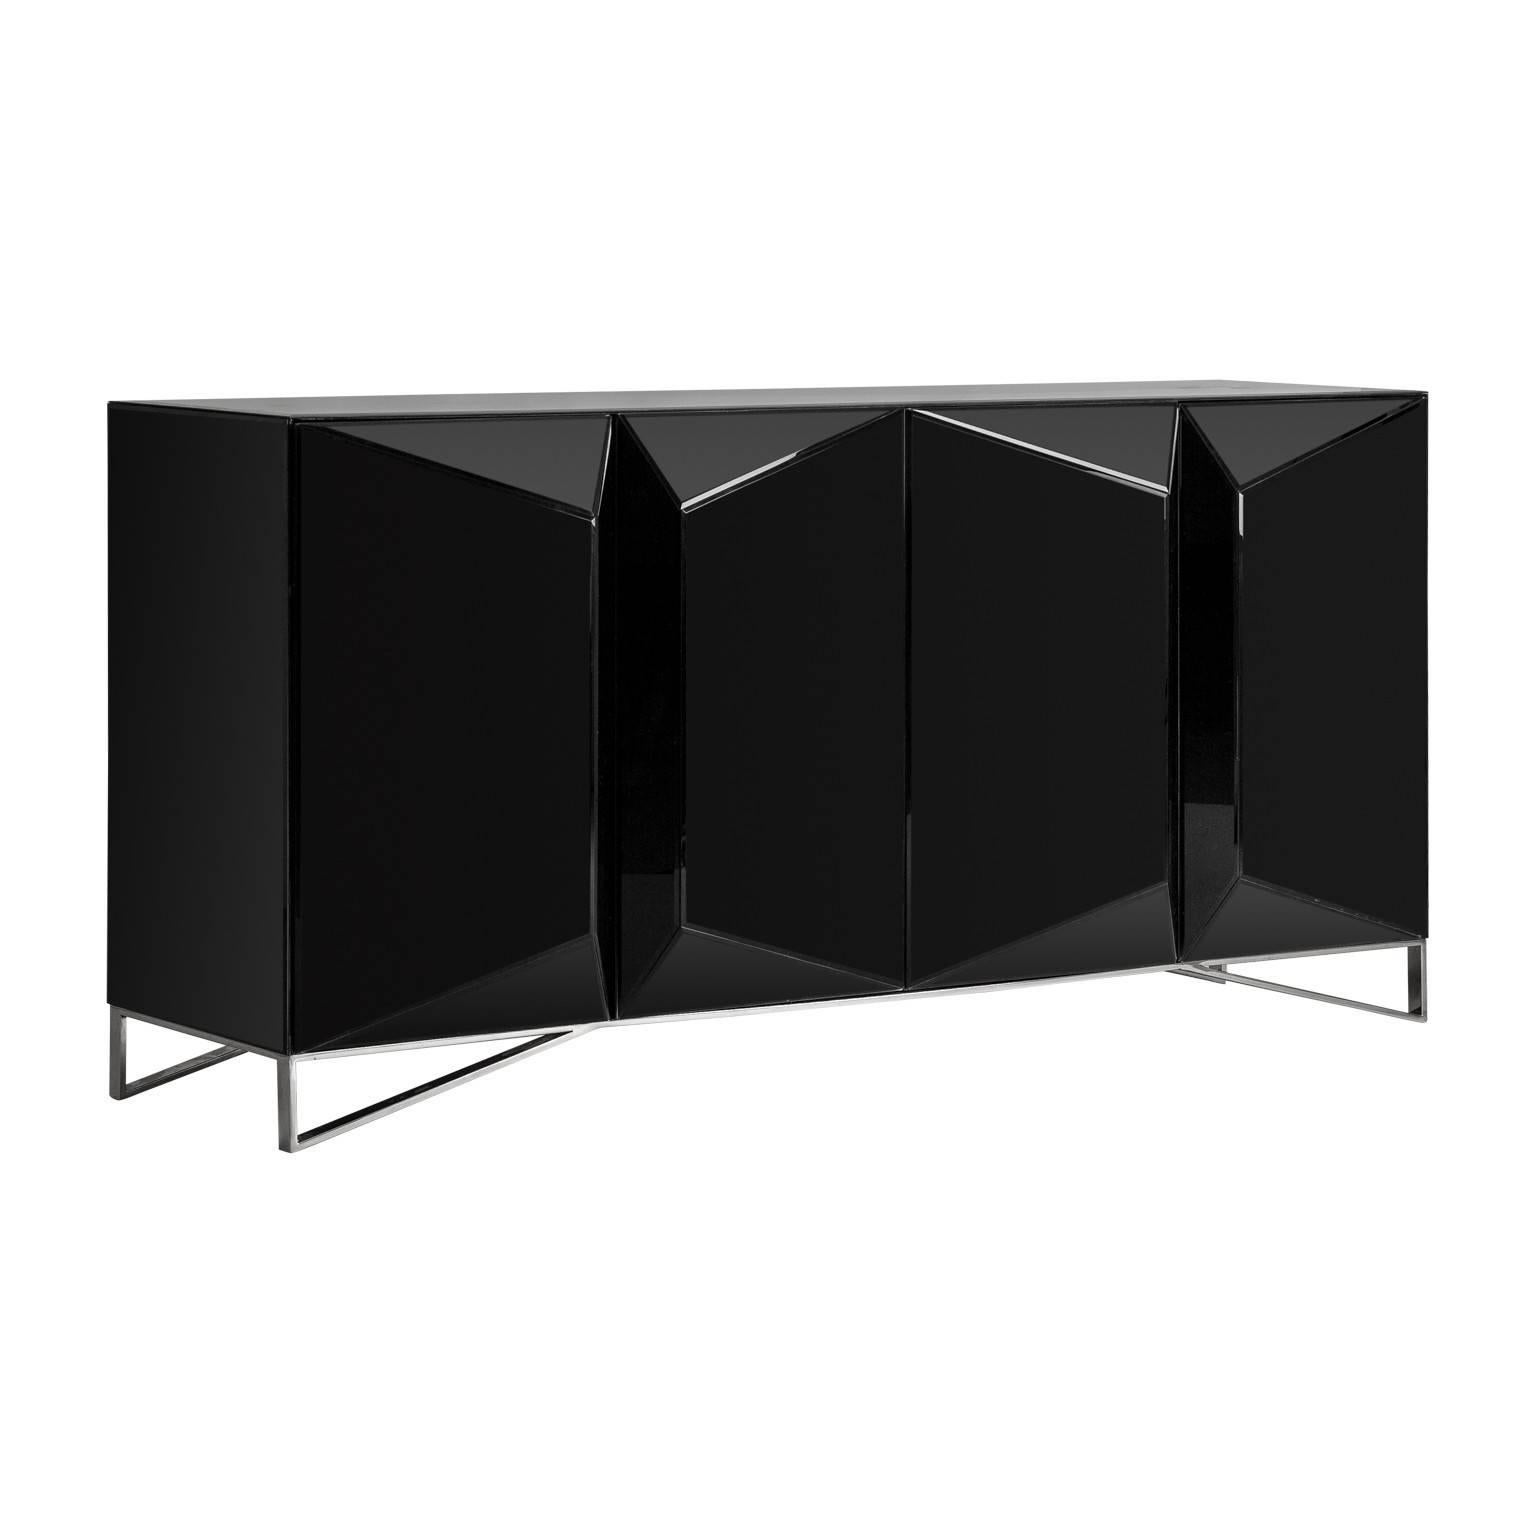 Sophisticated mirrored sideboard with four mirrored doors shaped like a diamond...precious!